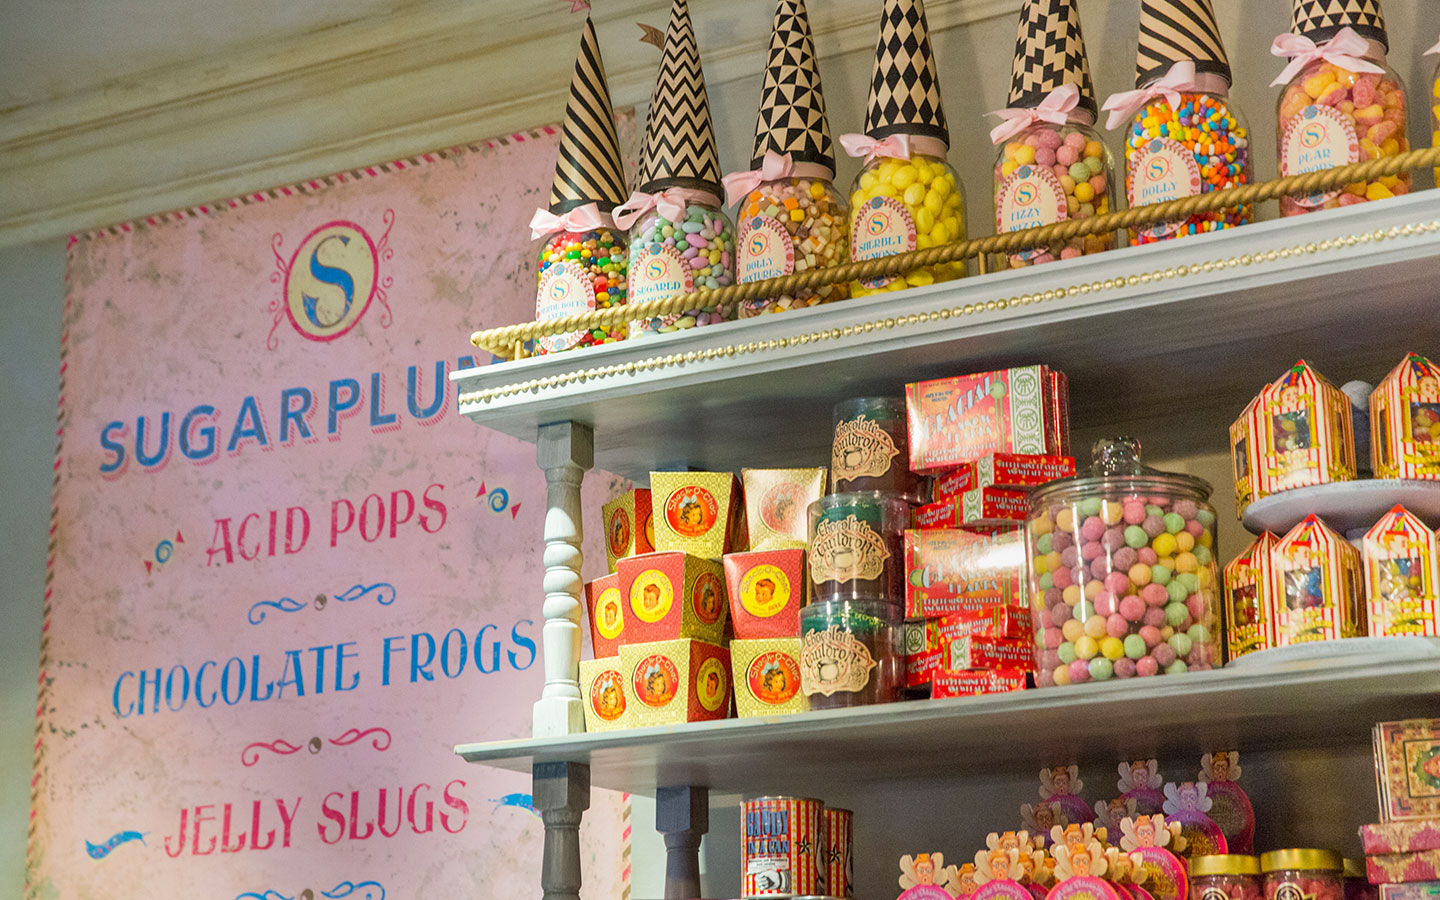 Grab a chocolate frog or butterbeer fudge at the new Sugarplum's sweet shop in The Wizarding World of Harry Potter - Diagon Alley